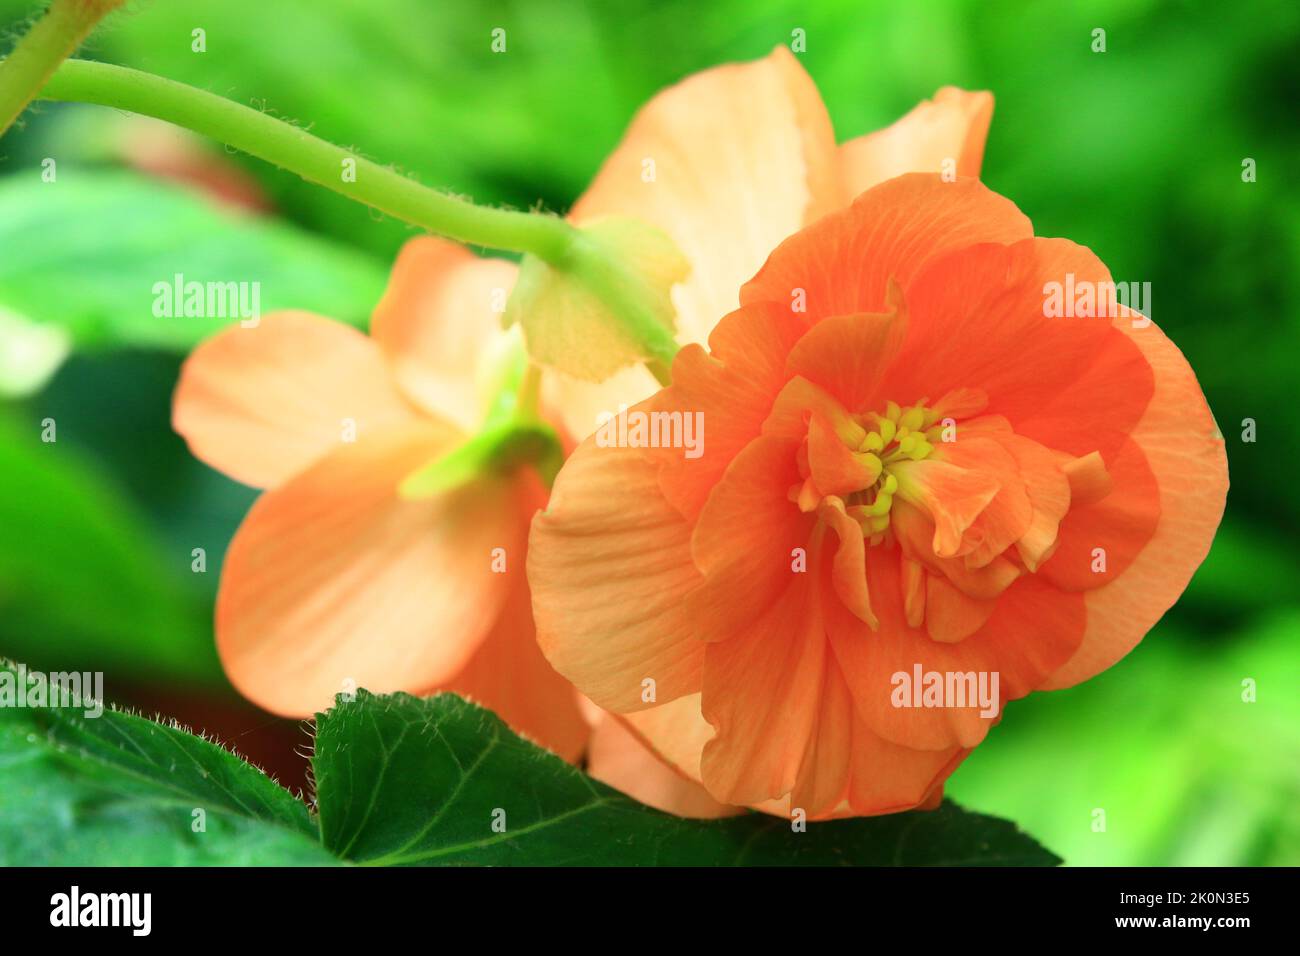 blooming colorful Begonia flowers,close-up of yellow with orange Begonia flowers blooming in the garden Stock Photo